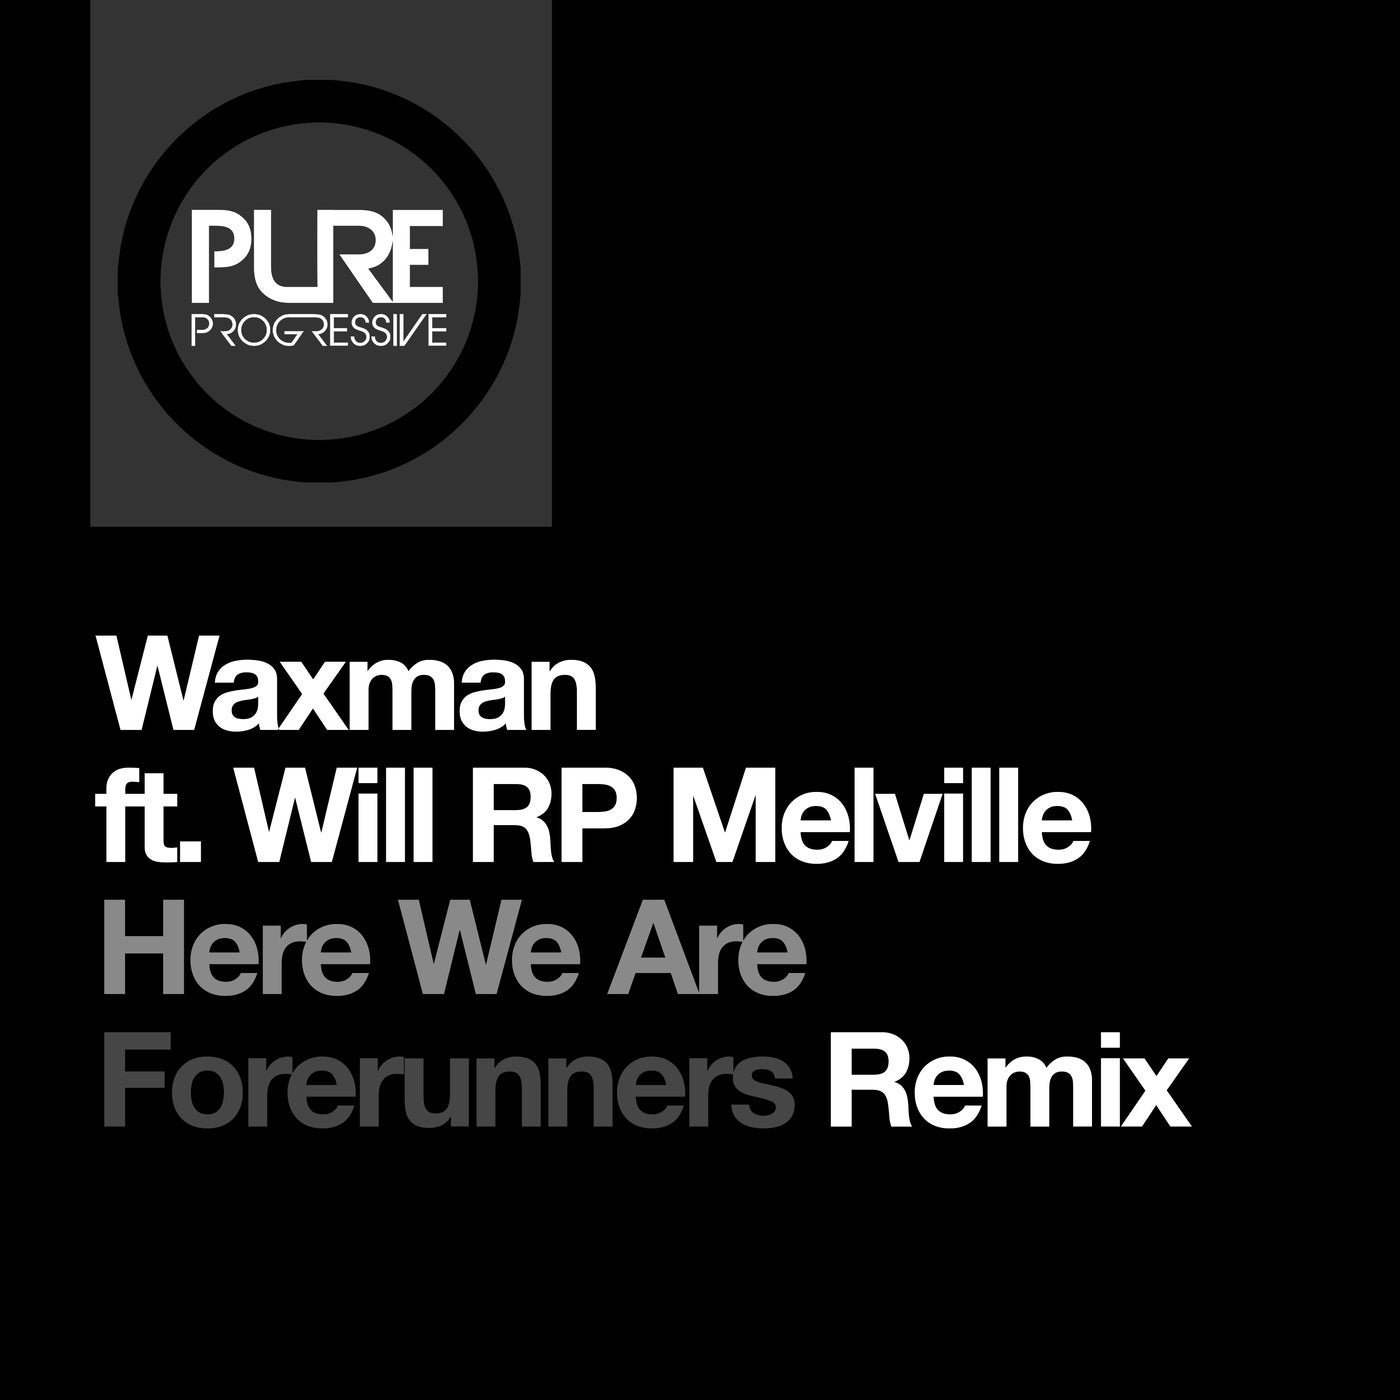 Cover - Will RP Melville, Waxman (CA) - Here We Are feat. Will RP Melville (Forerunners Remix)